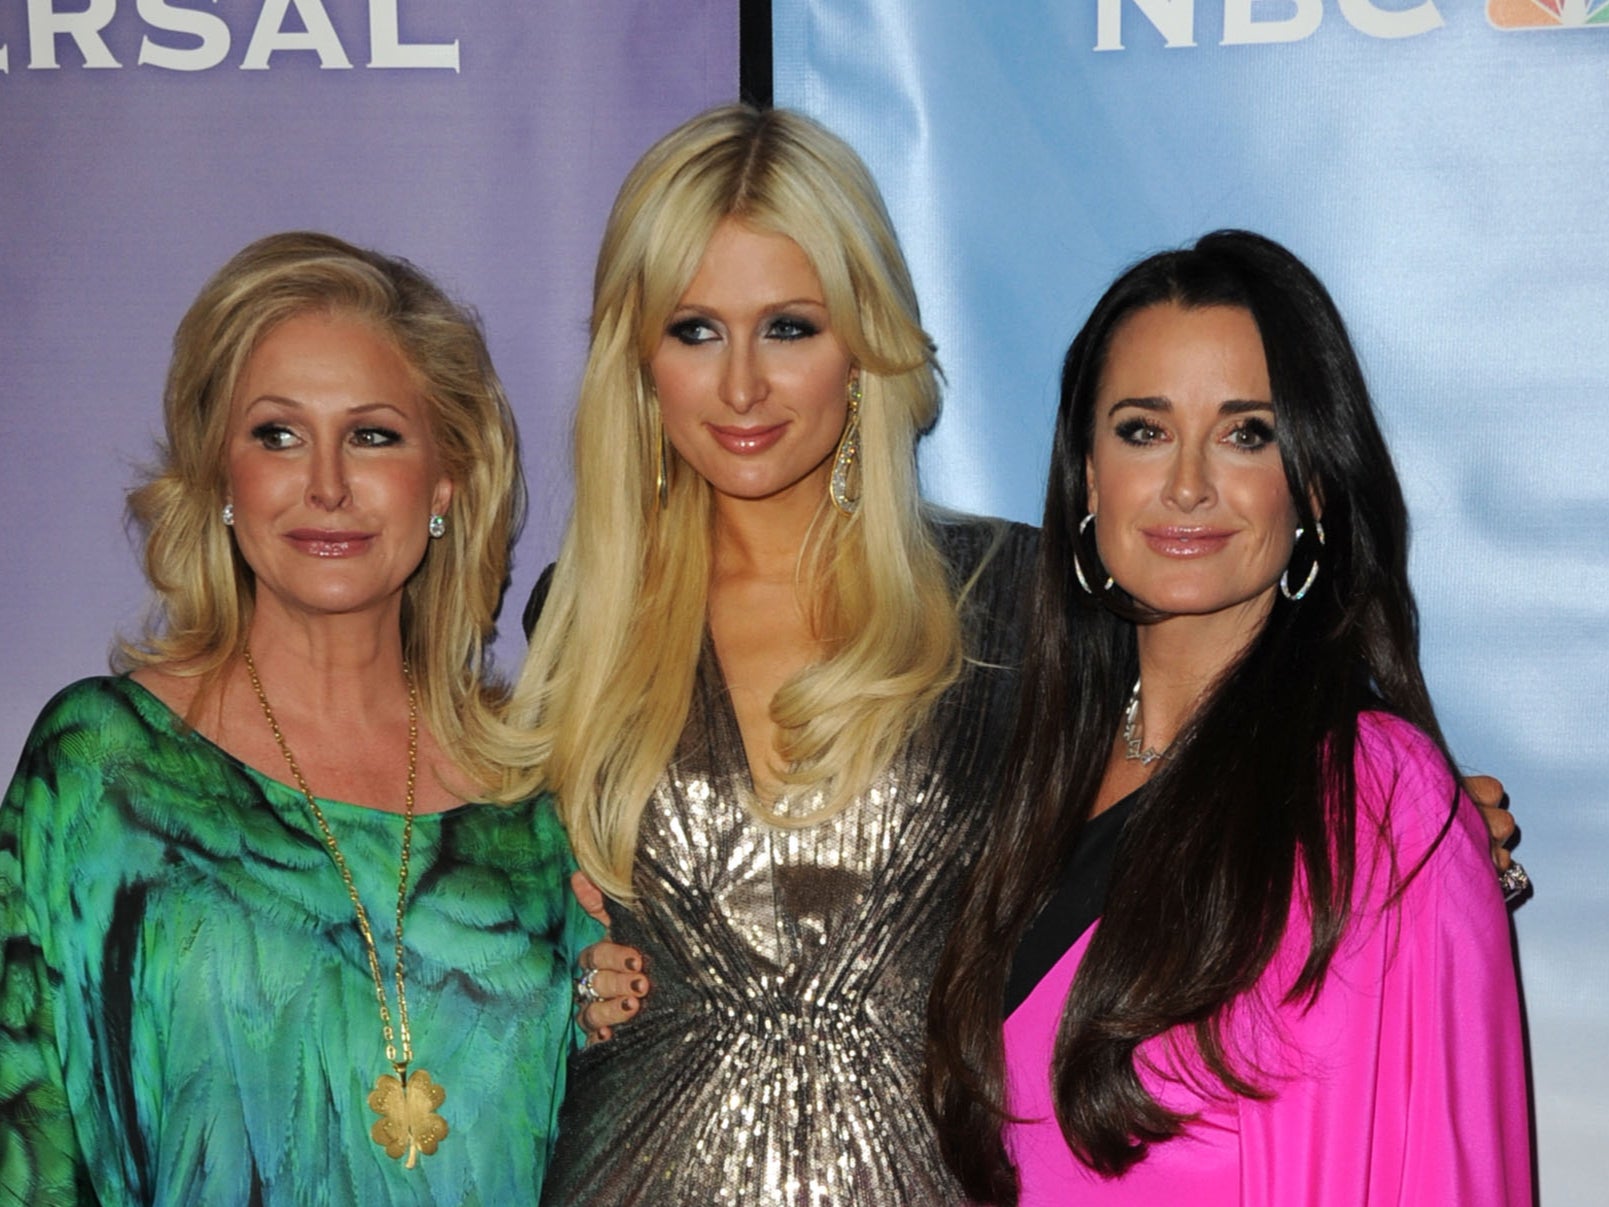 Paris Hilton calls aunt Kyle Richards out for being unkind to her mother Kathy Hilton The Independent pic